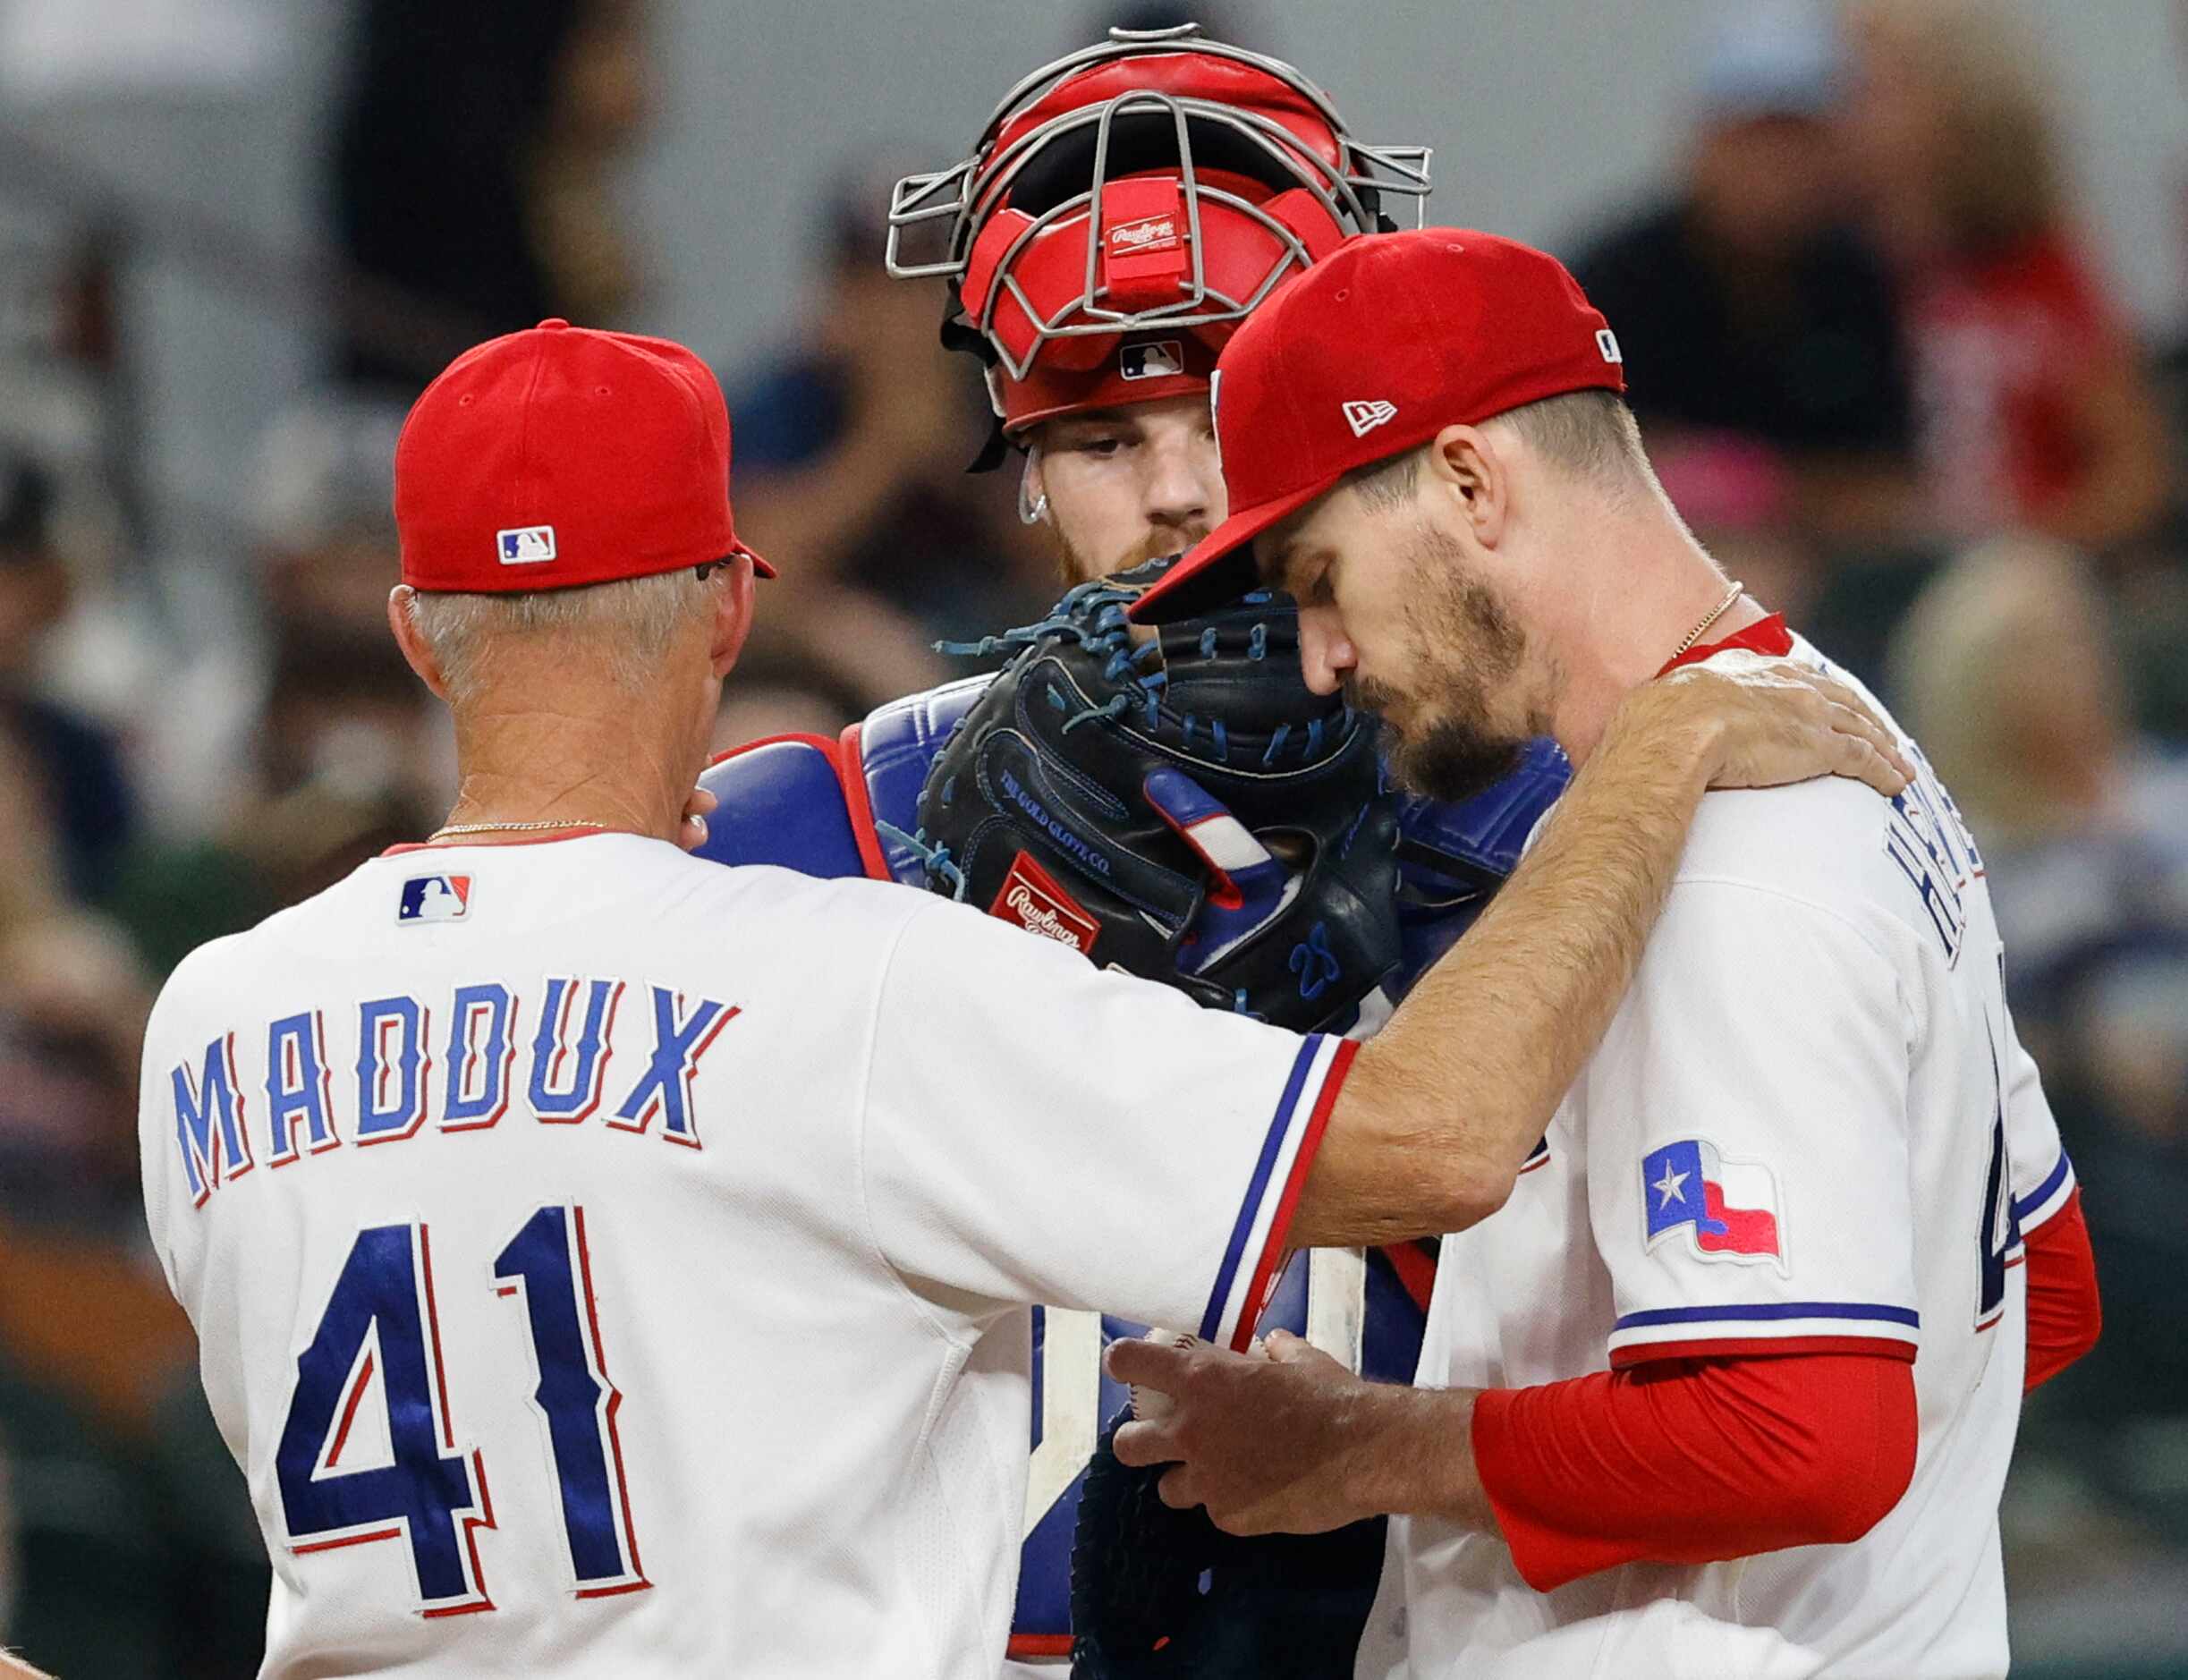 Texas Rangers pitching coach Mike Maddox (41) talks with Texas Rangers starting pitcher...